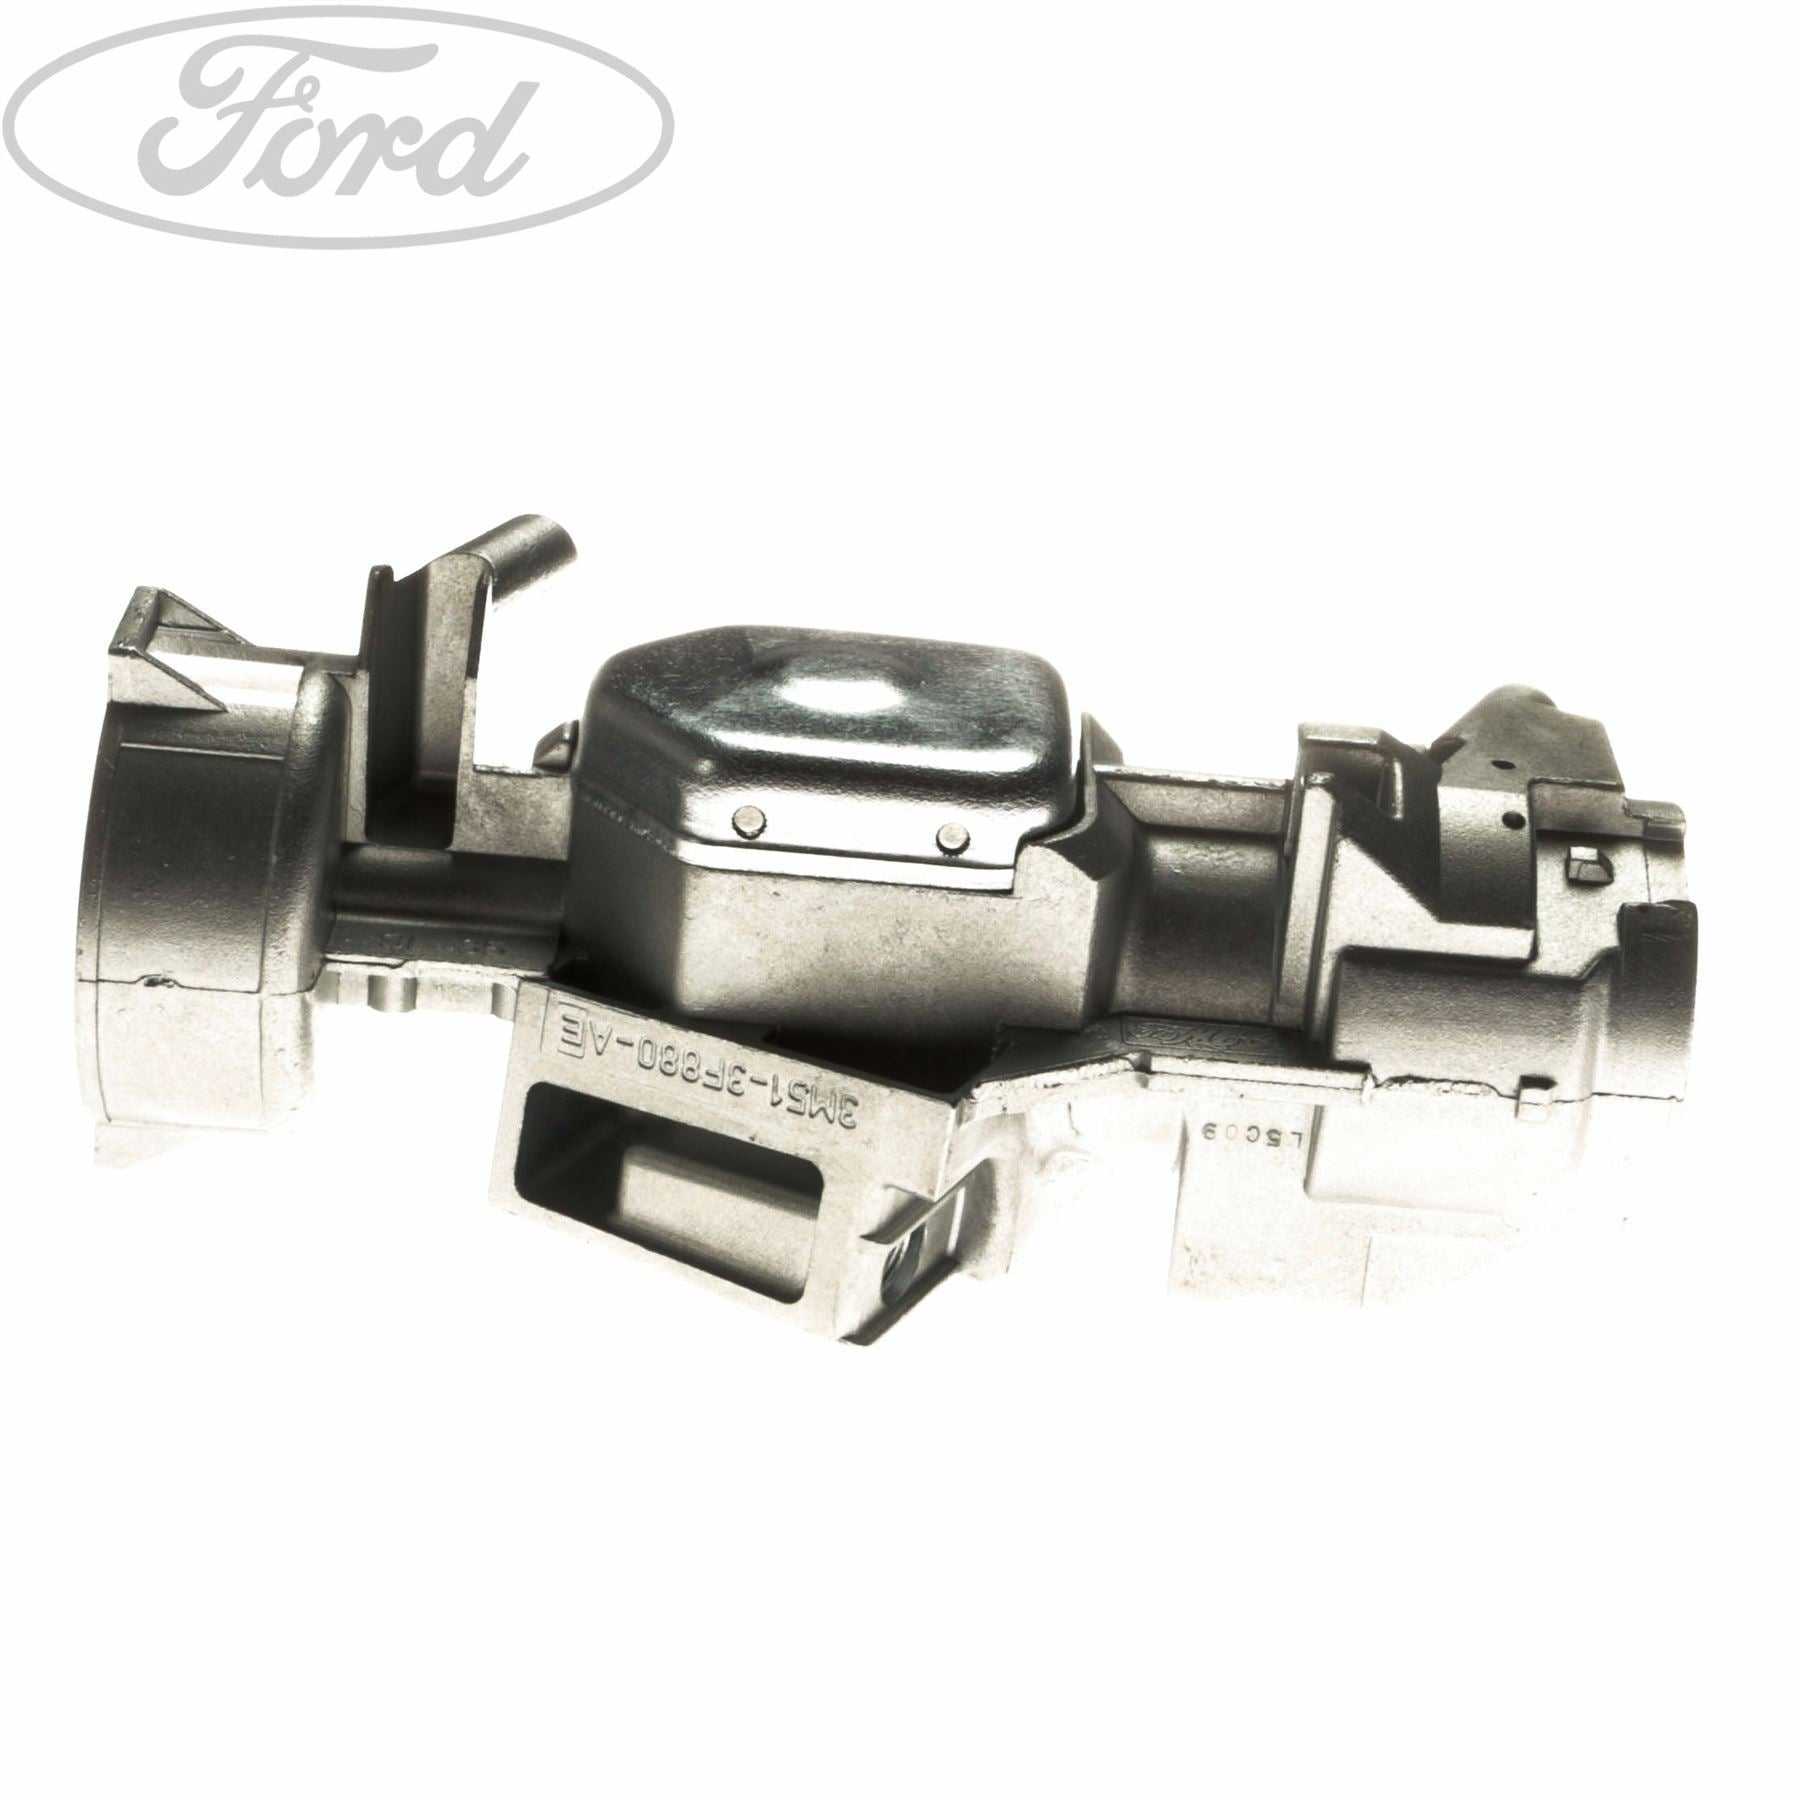 Ford, STEERING AND IGNITION LOCK